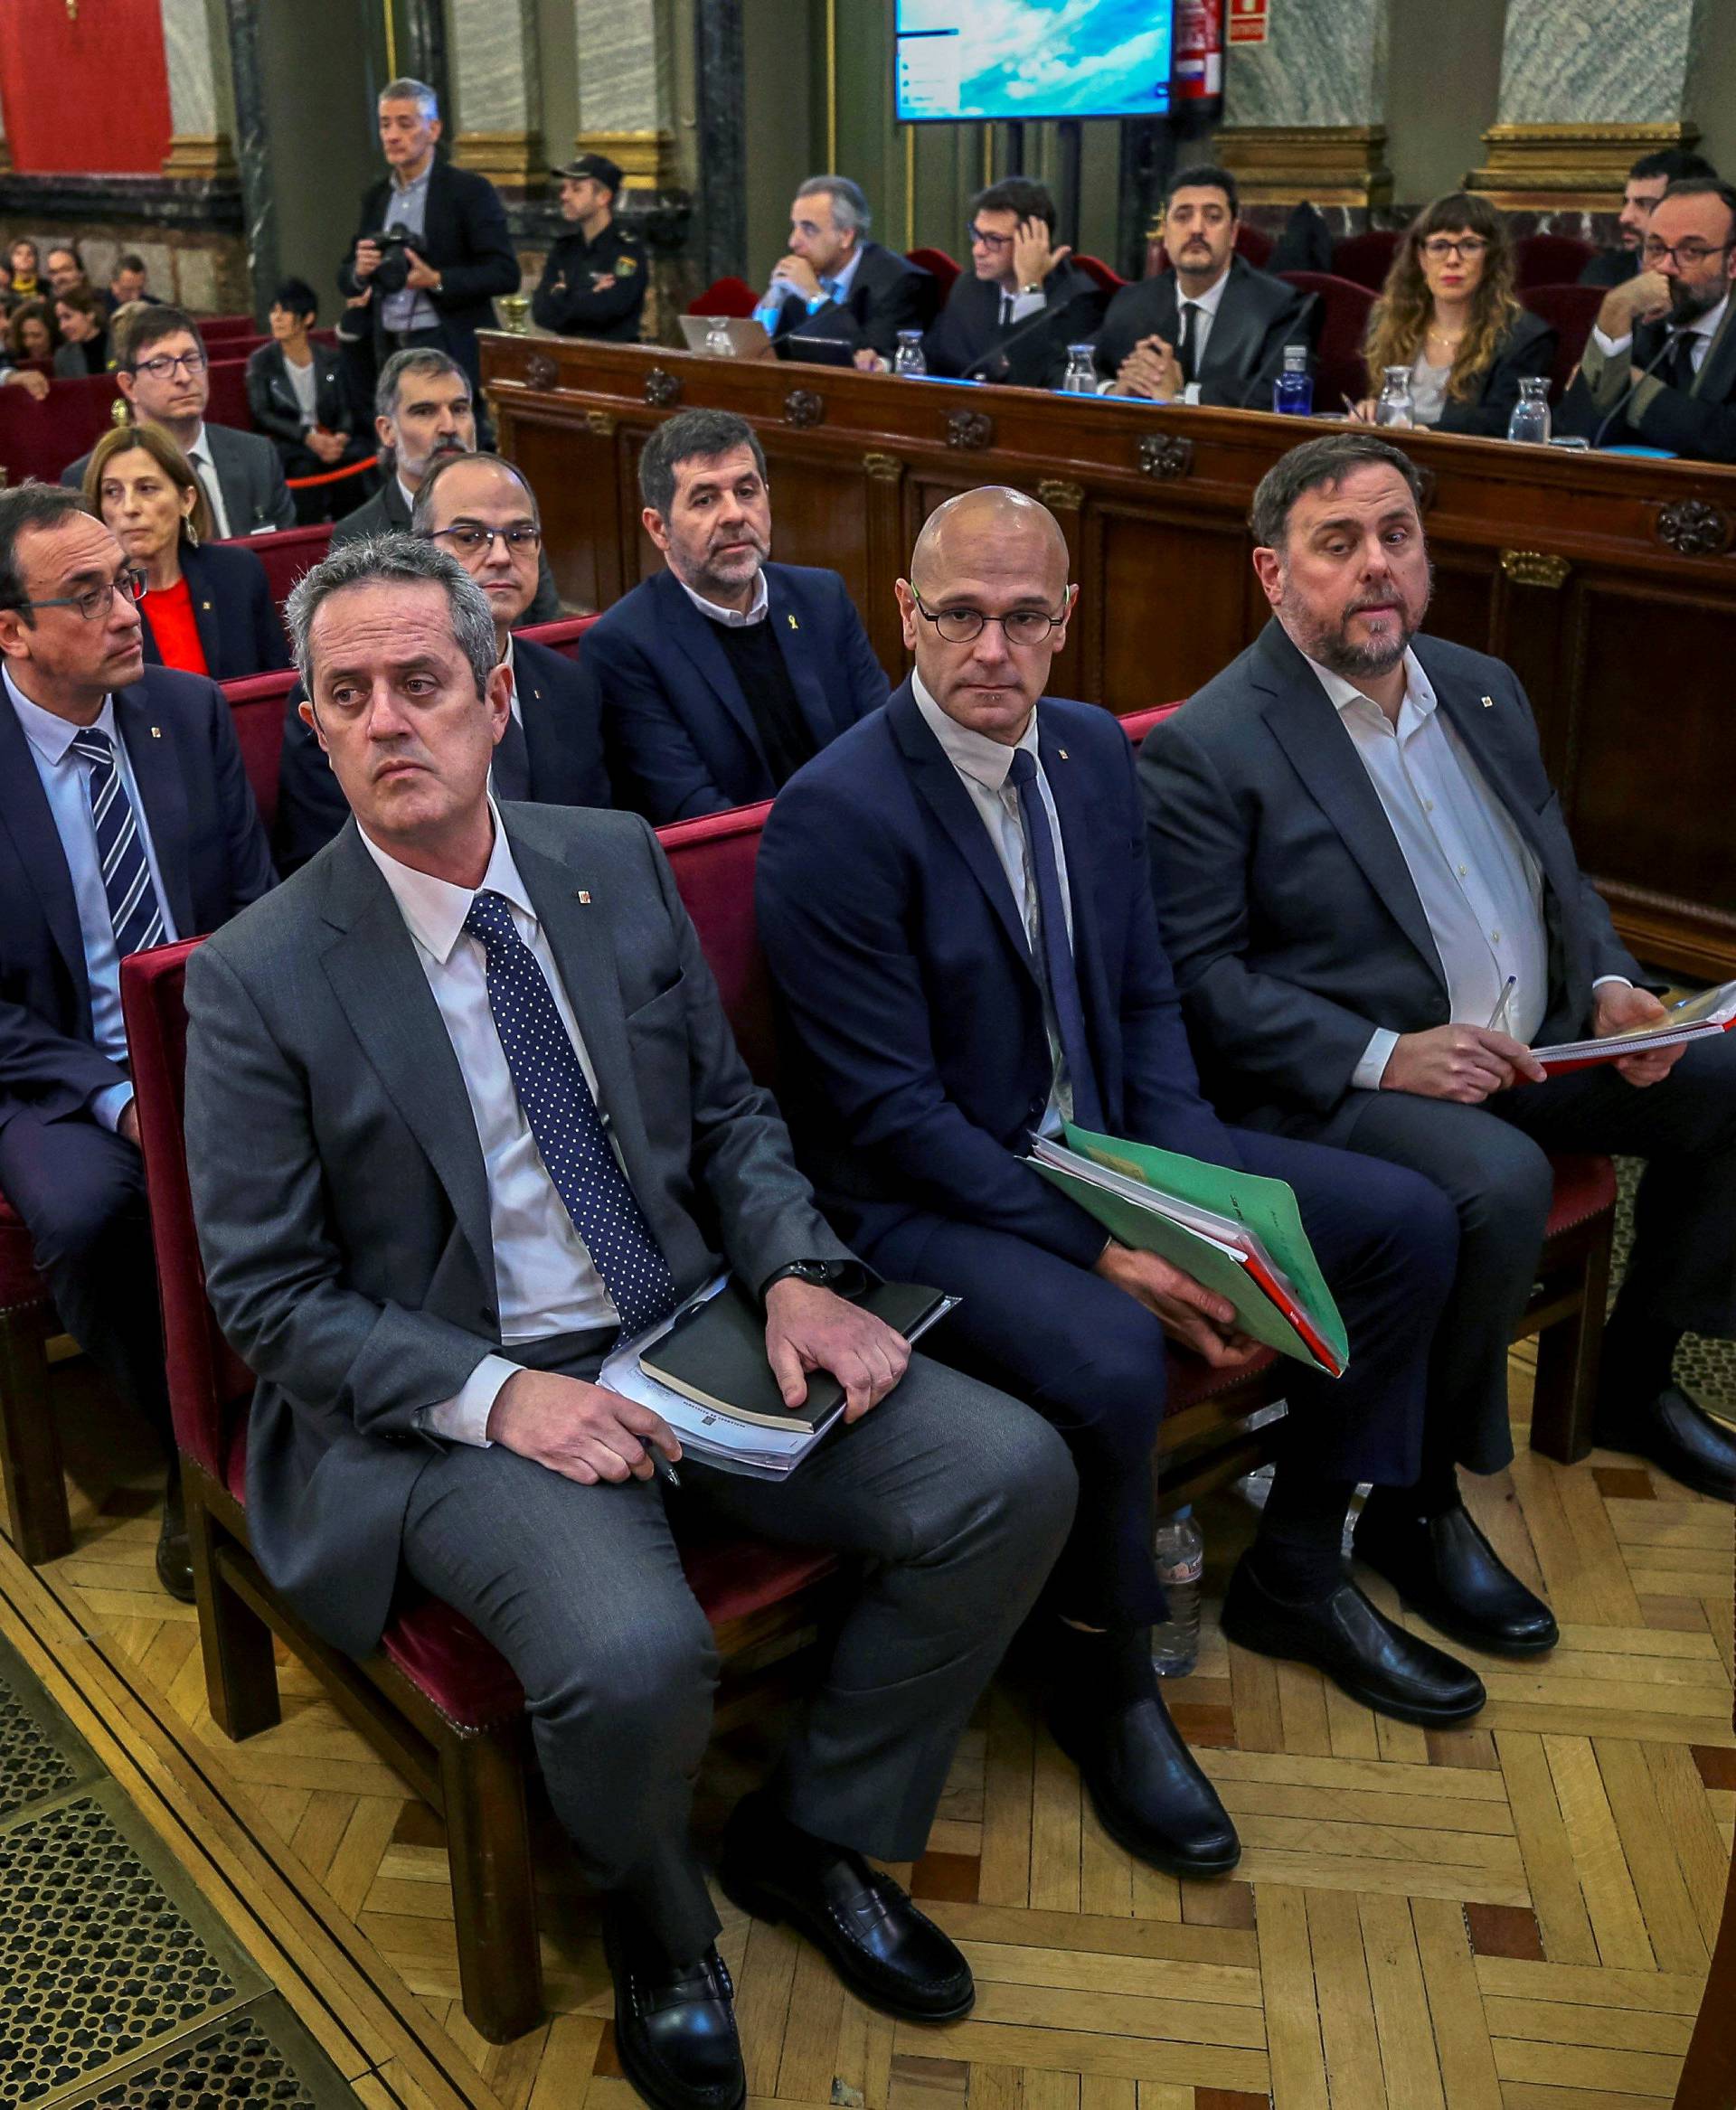 Catalan separatist leaders appear in court at the start of their trial at Supreme Court in Madrid